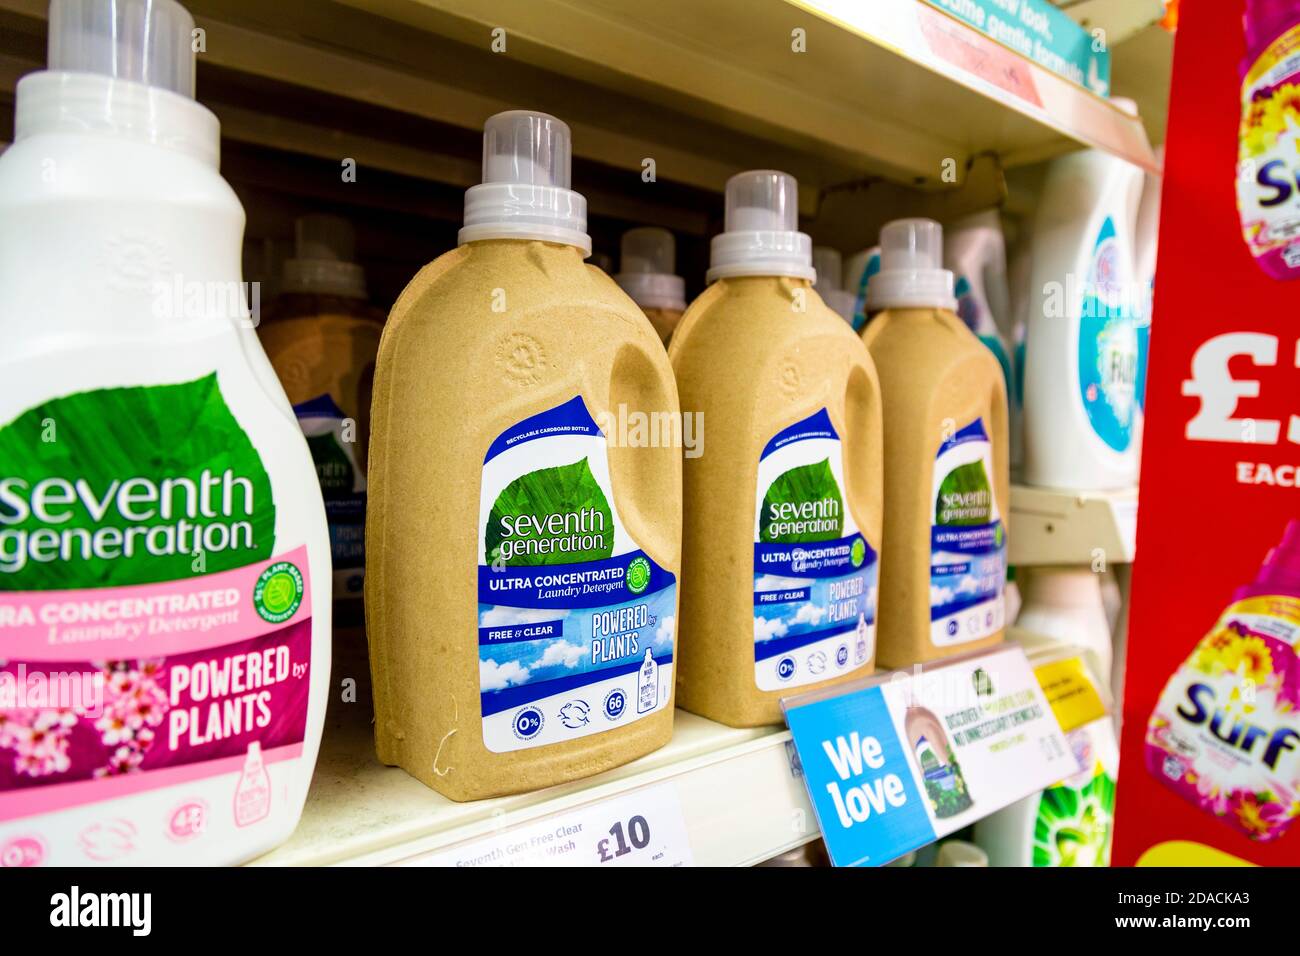 Seventh Generation laundry detergent in bottles made from recycled fibre on supermarket shelf, London, UK Stock Photo